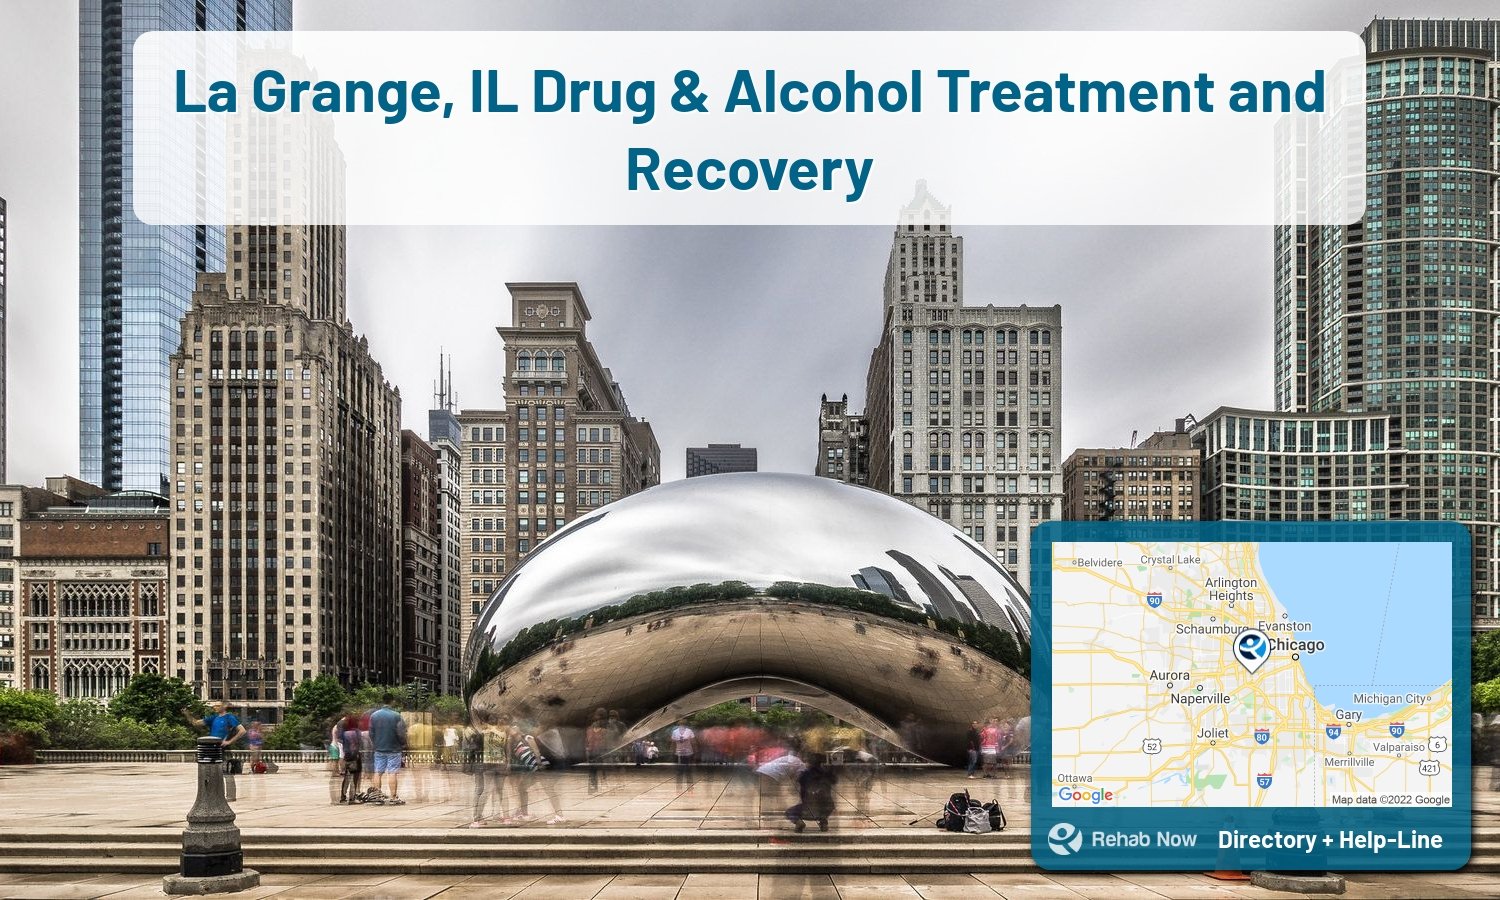 List of alcohol and drug treatment centers near you in La Grange, Illinois. Research certifications, programs, methods, pricing, and more.